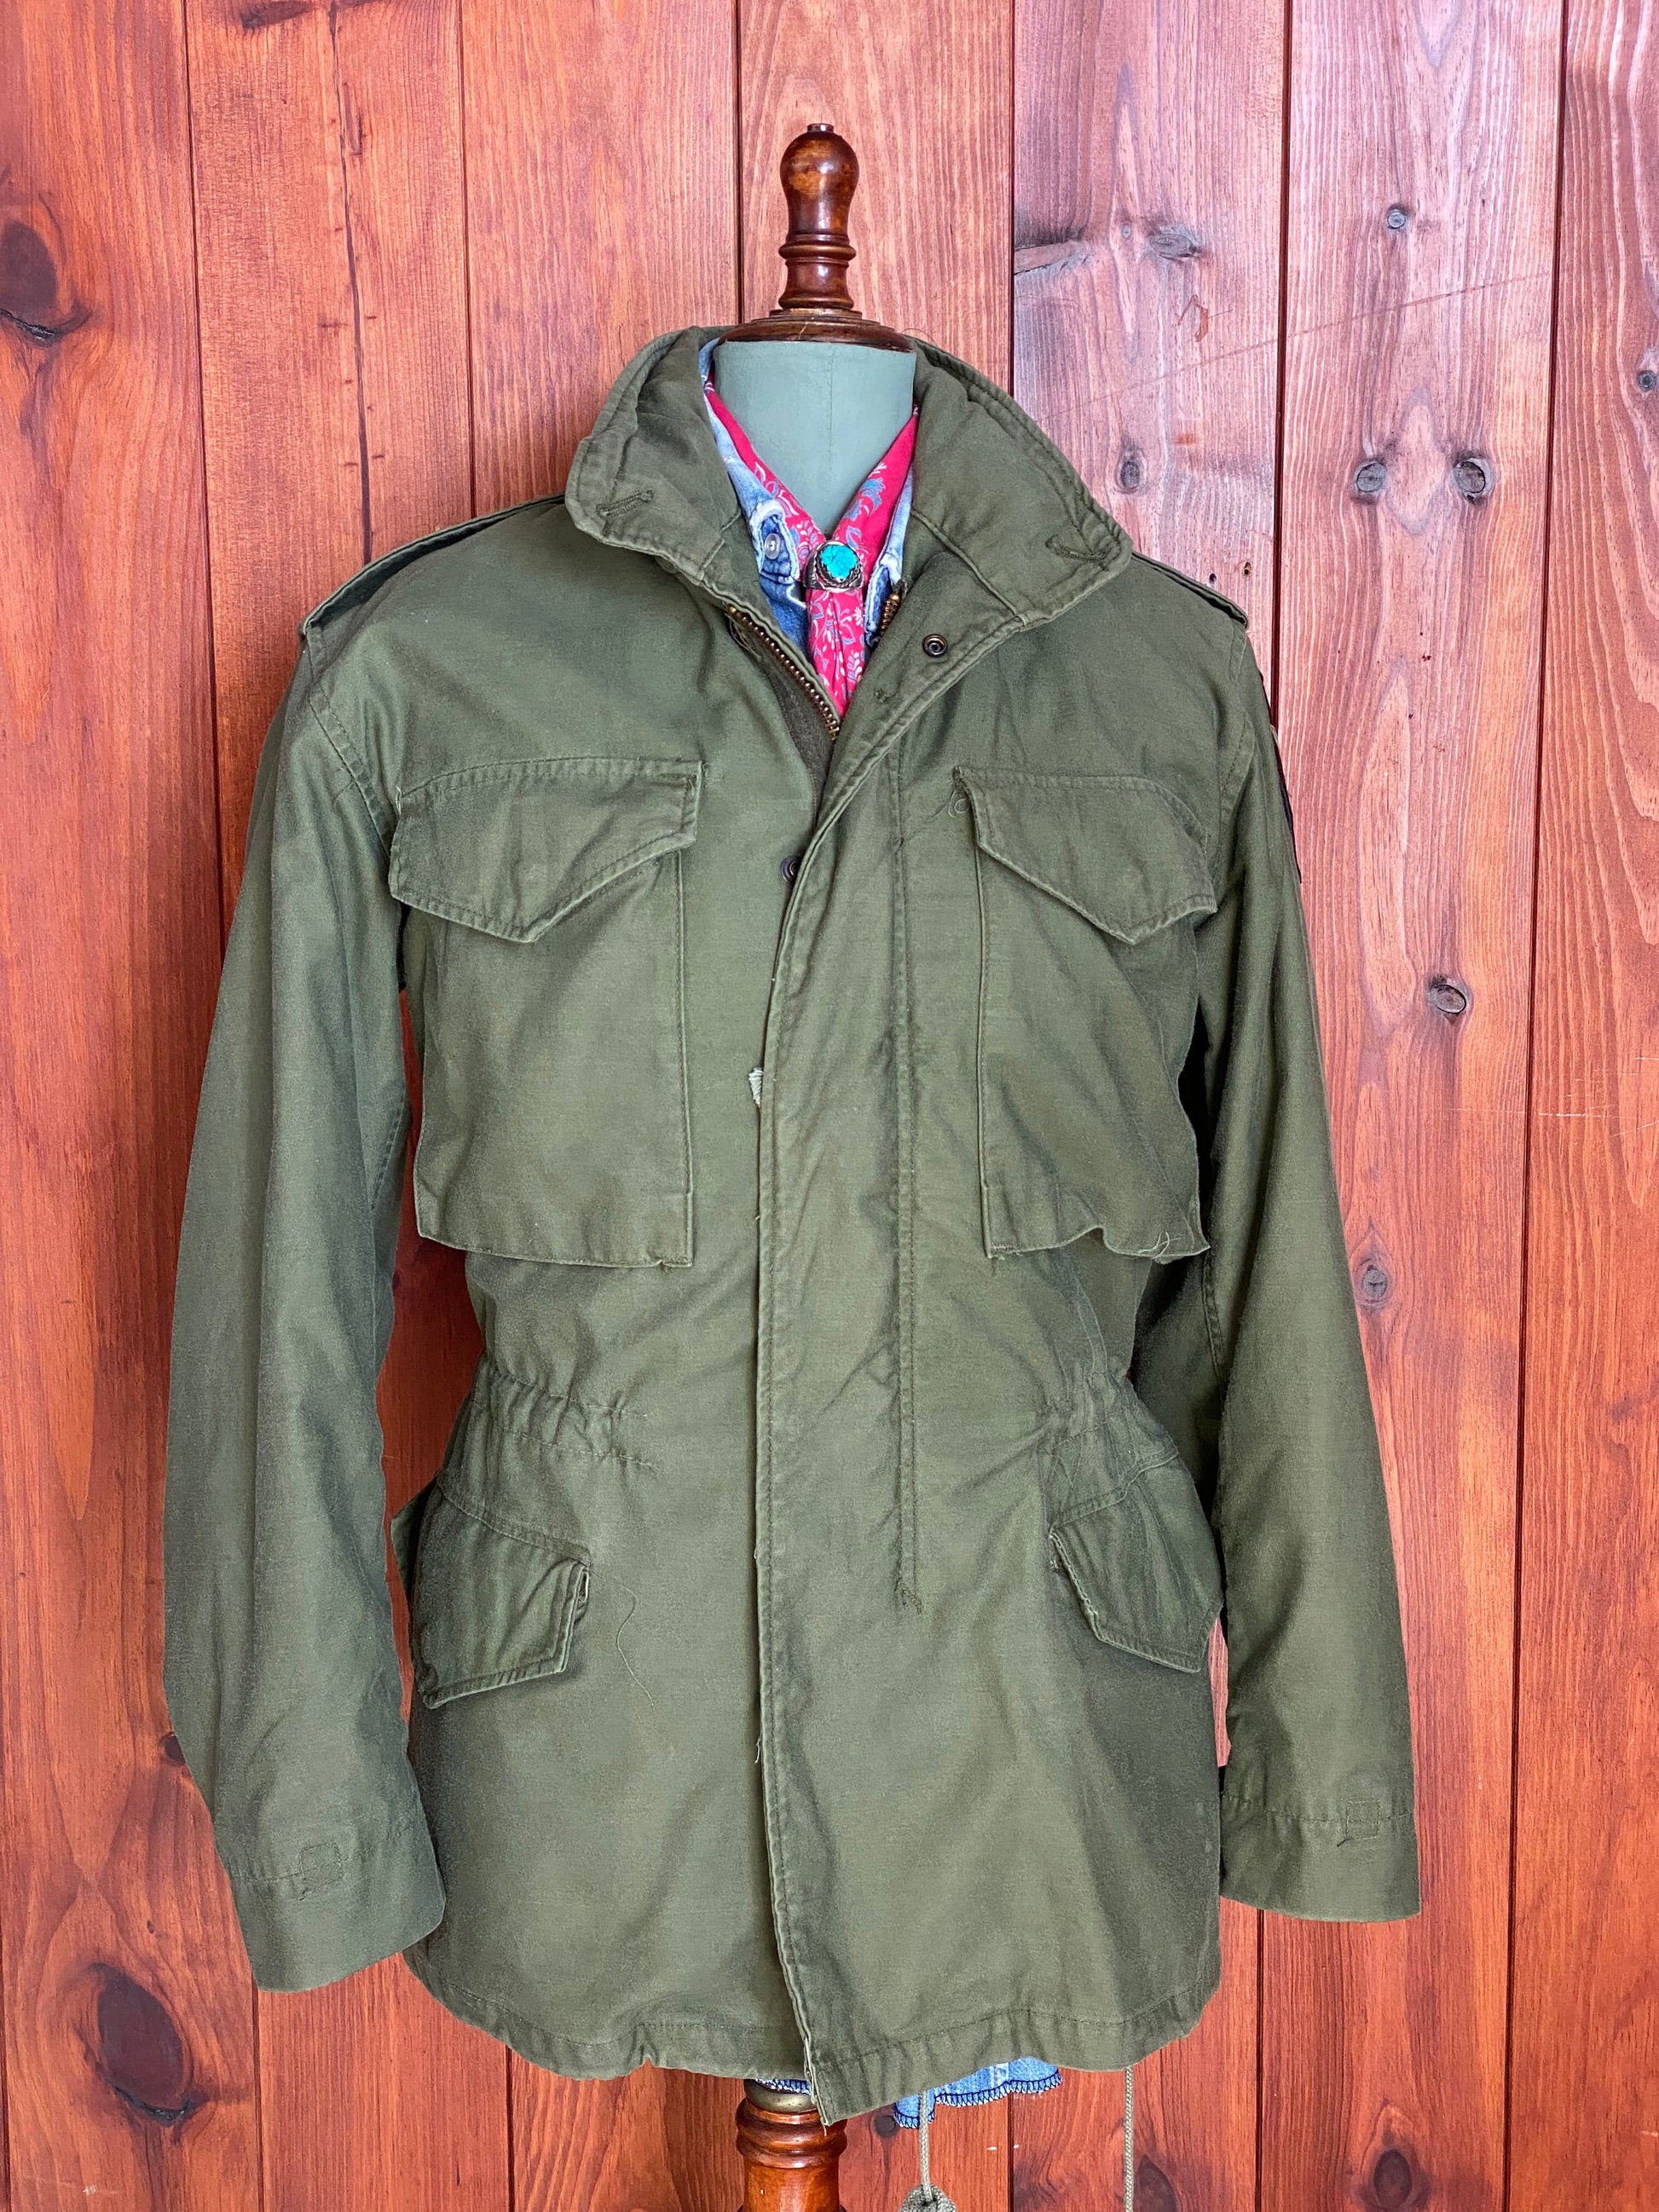 Original US Military 1981 Vintage M-65 Field Jacket | Classic Olive Green Military Apparel with Timeless Style and Durability